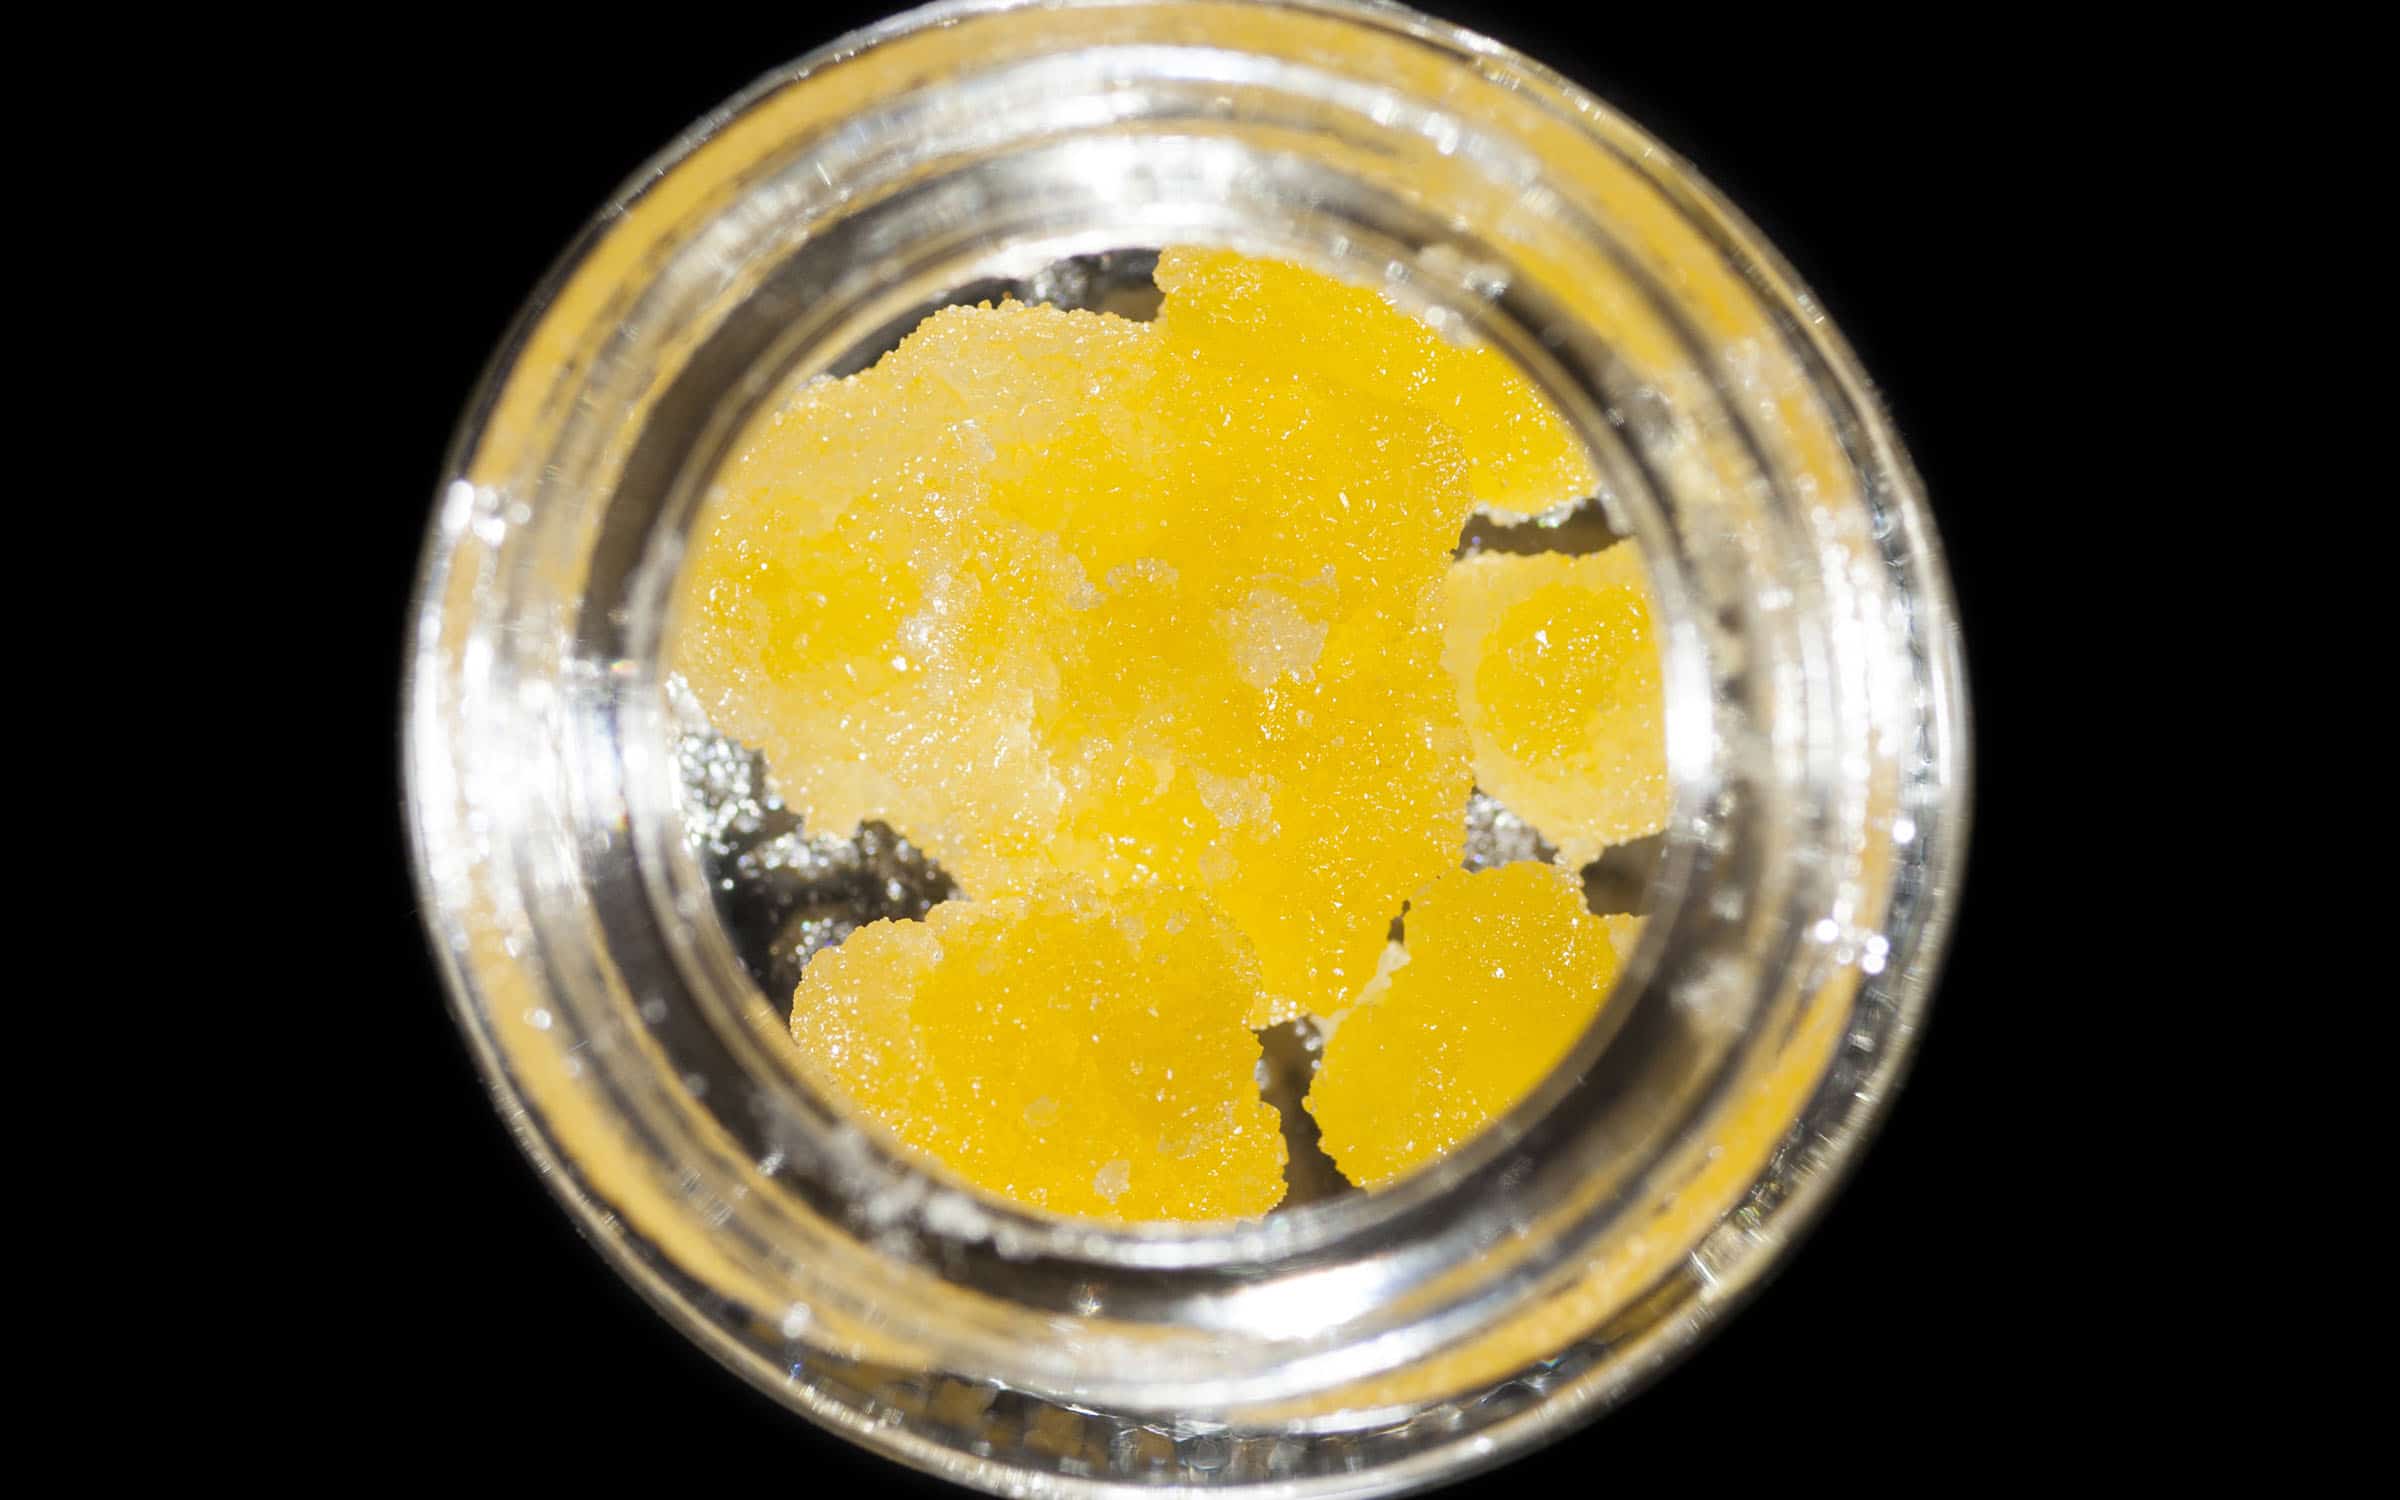 ci17_larry_og_live_resin_thca_sugar_gold_nugget_extracts_with_new_amsterdam_naturals